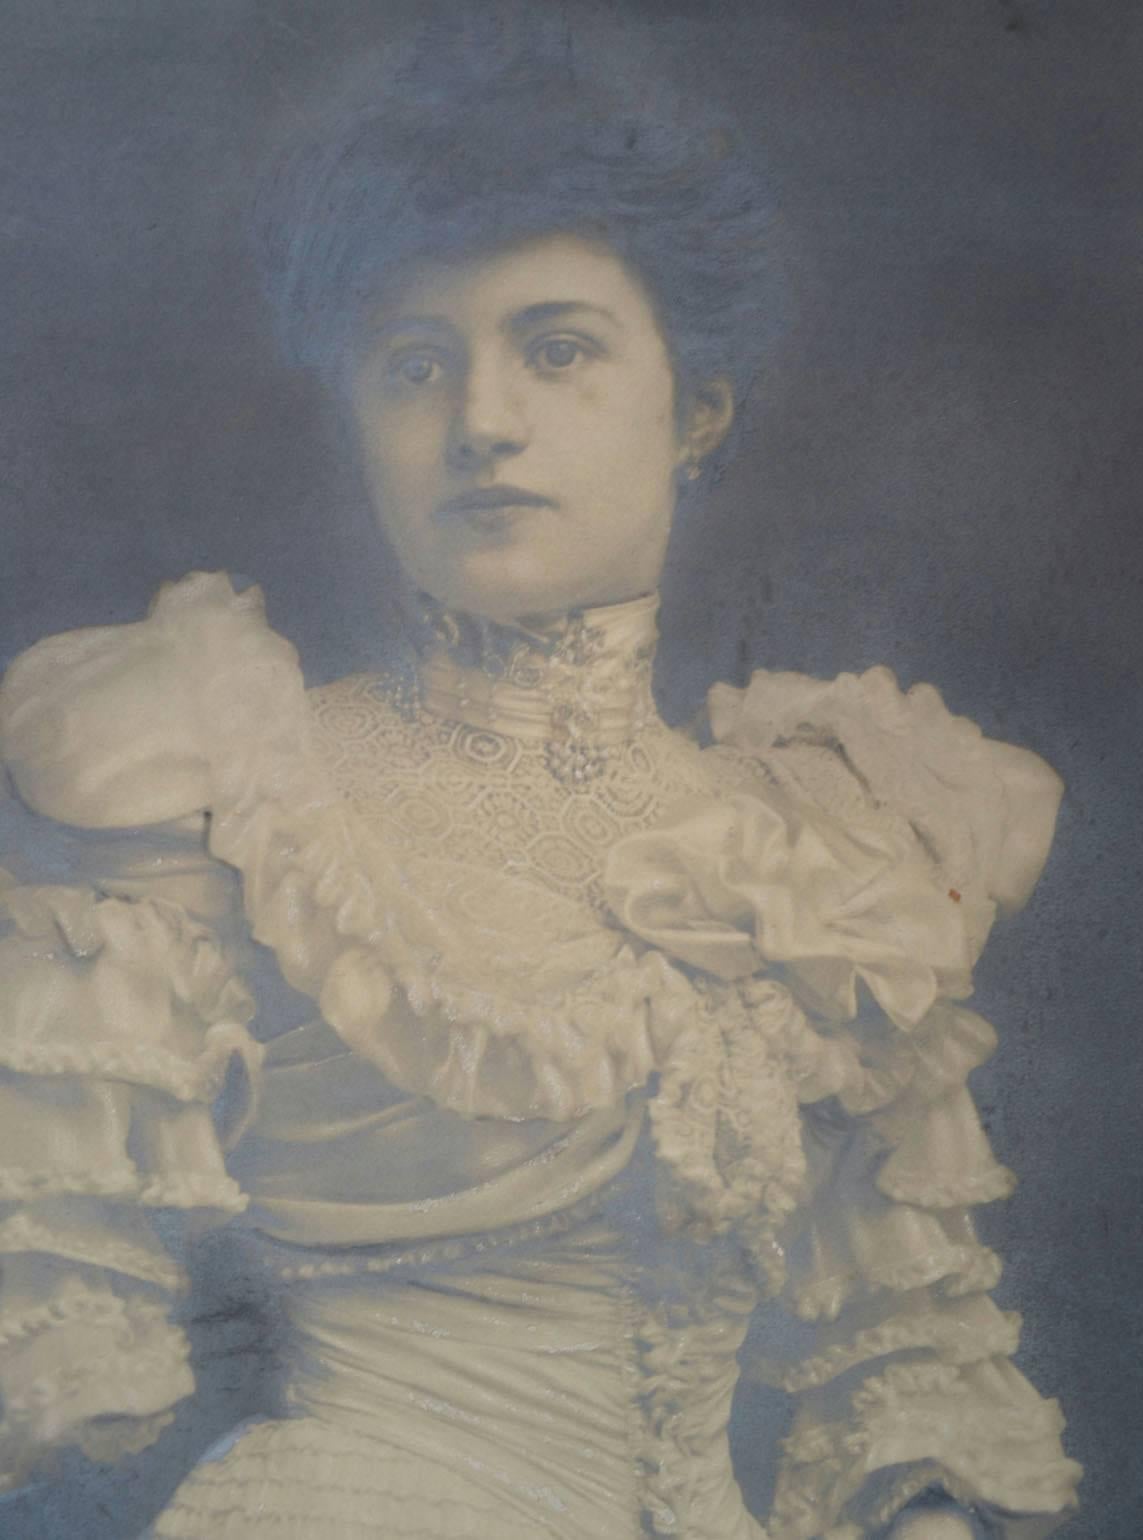 Large original Edwardian silver print photo portrait of an well dressed aristocratic women around 1900 framed in it's original decorated gilded frame with a floral motive.
The photo is slightly faded and there is minor loss on the frame.
Dimensions